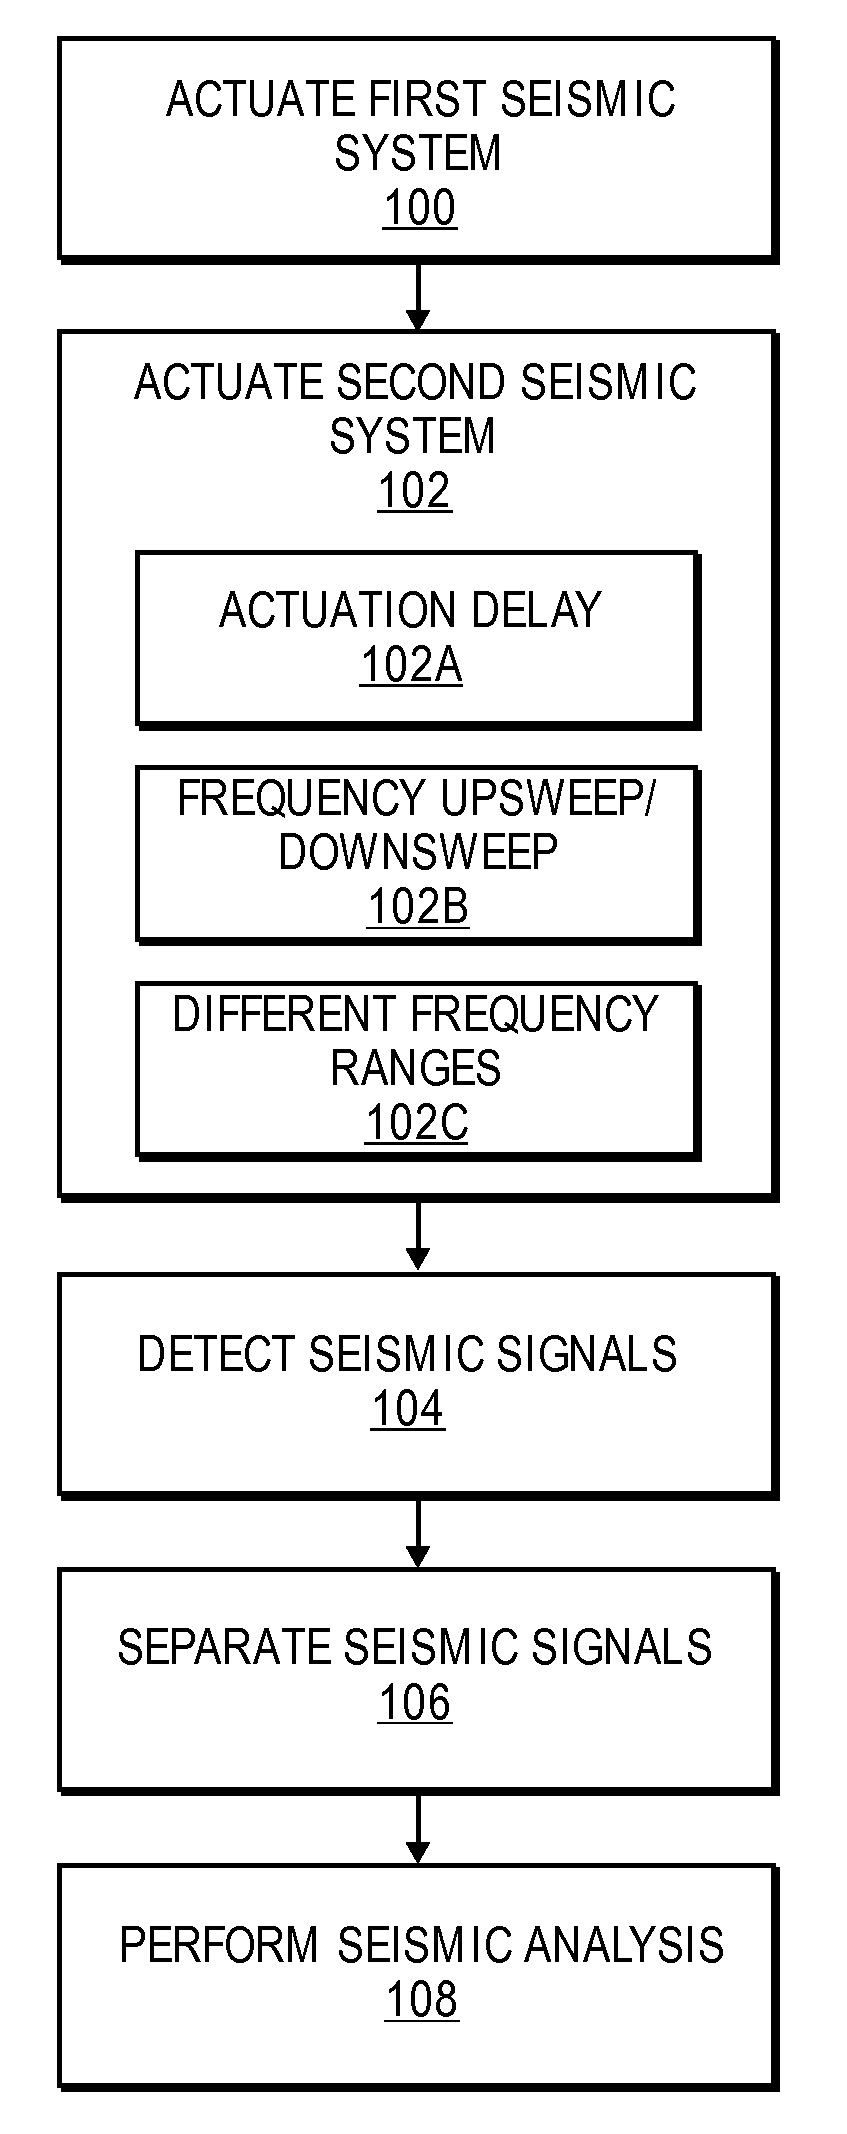 Method and apparatus for minimizing interference between seismic systems